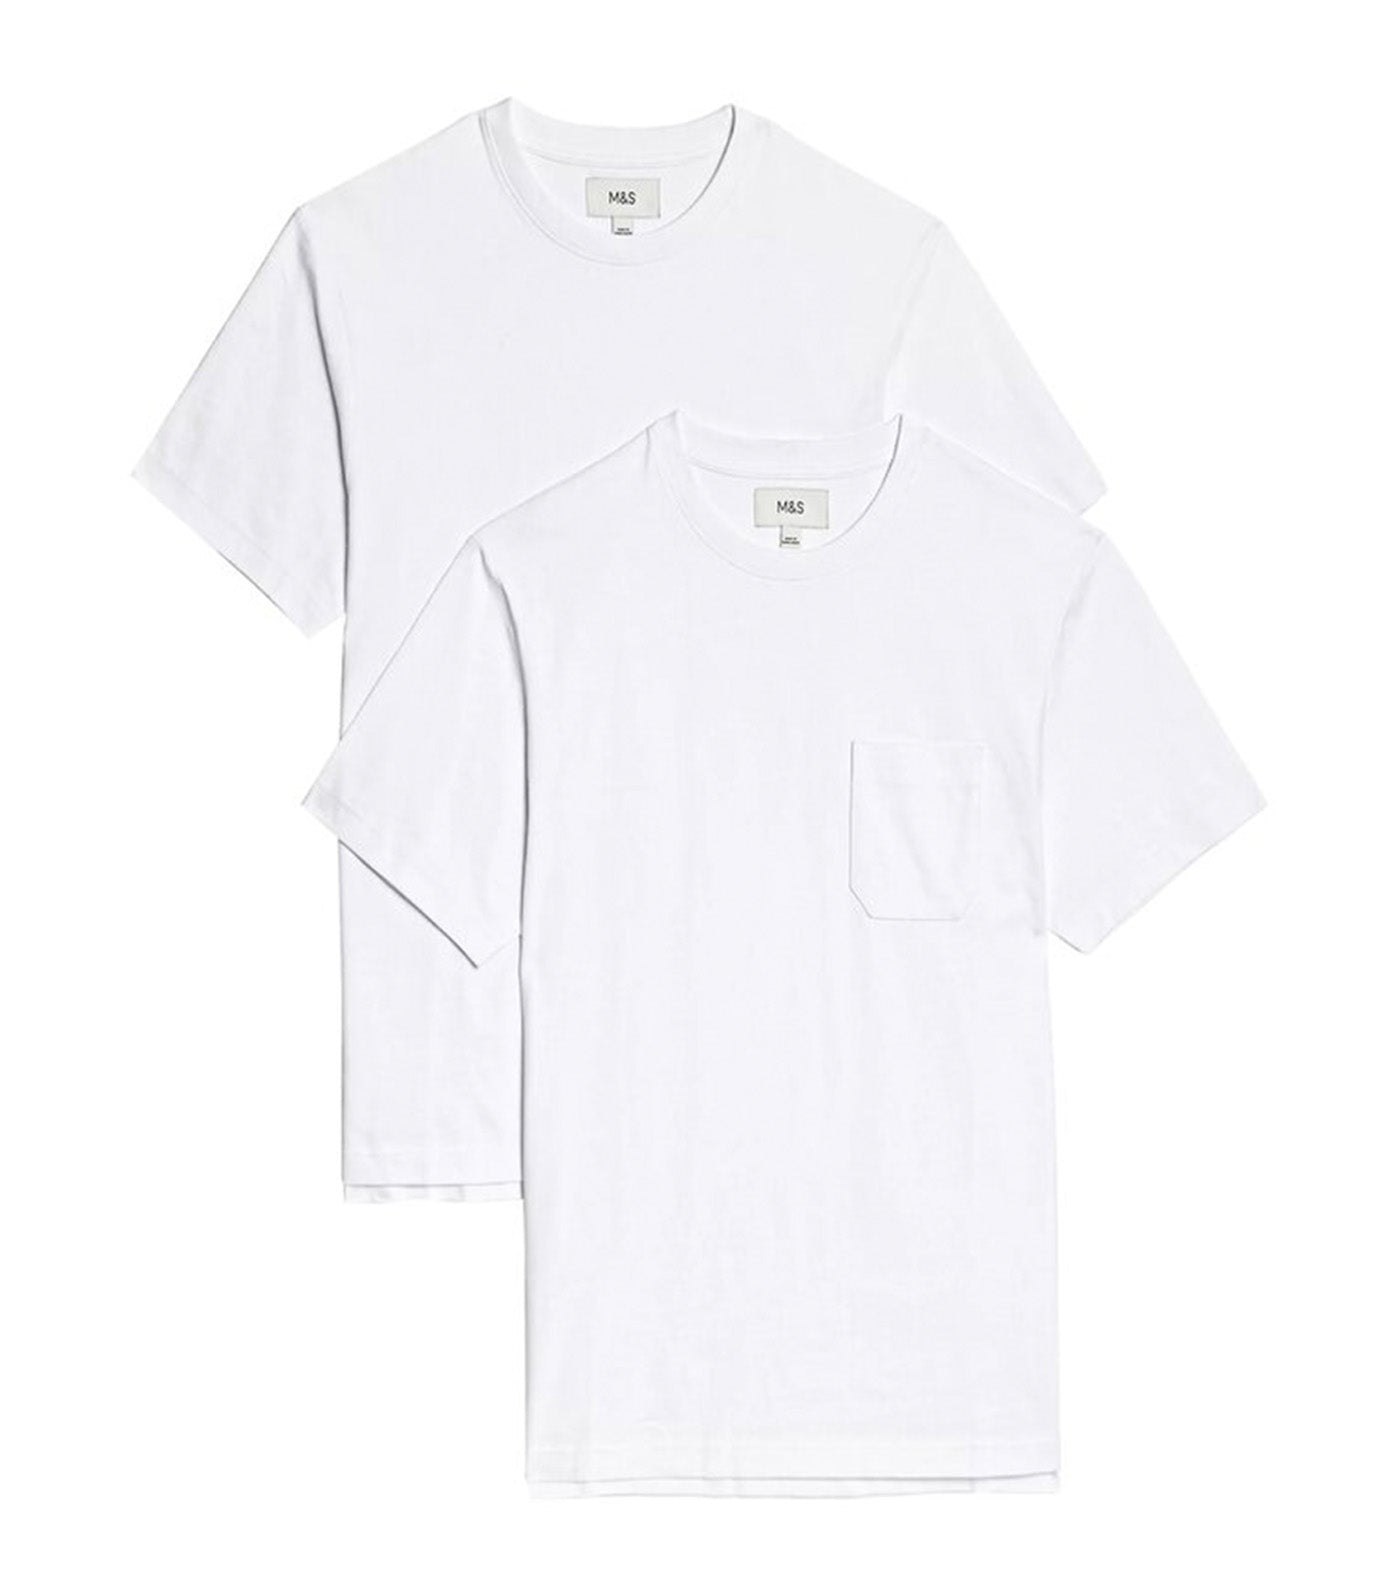 2-Pack Pure Cotton Crew Neck T-Shirts White